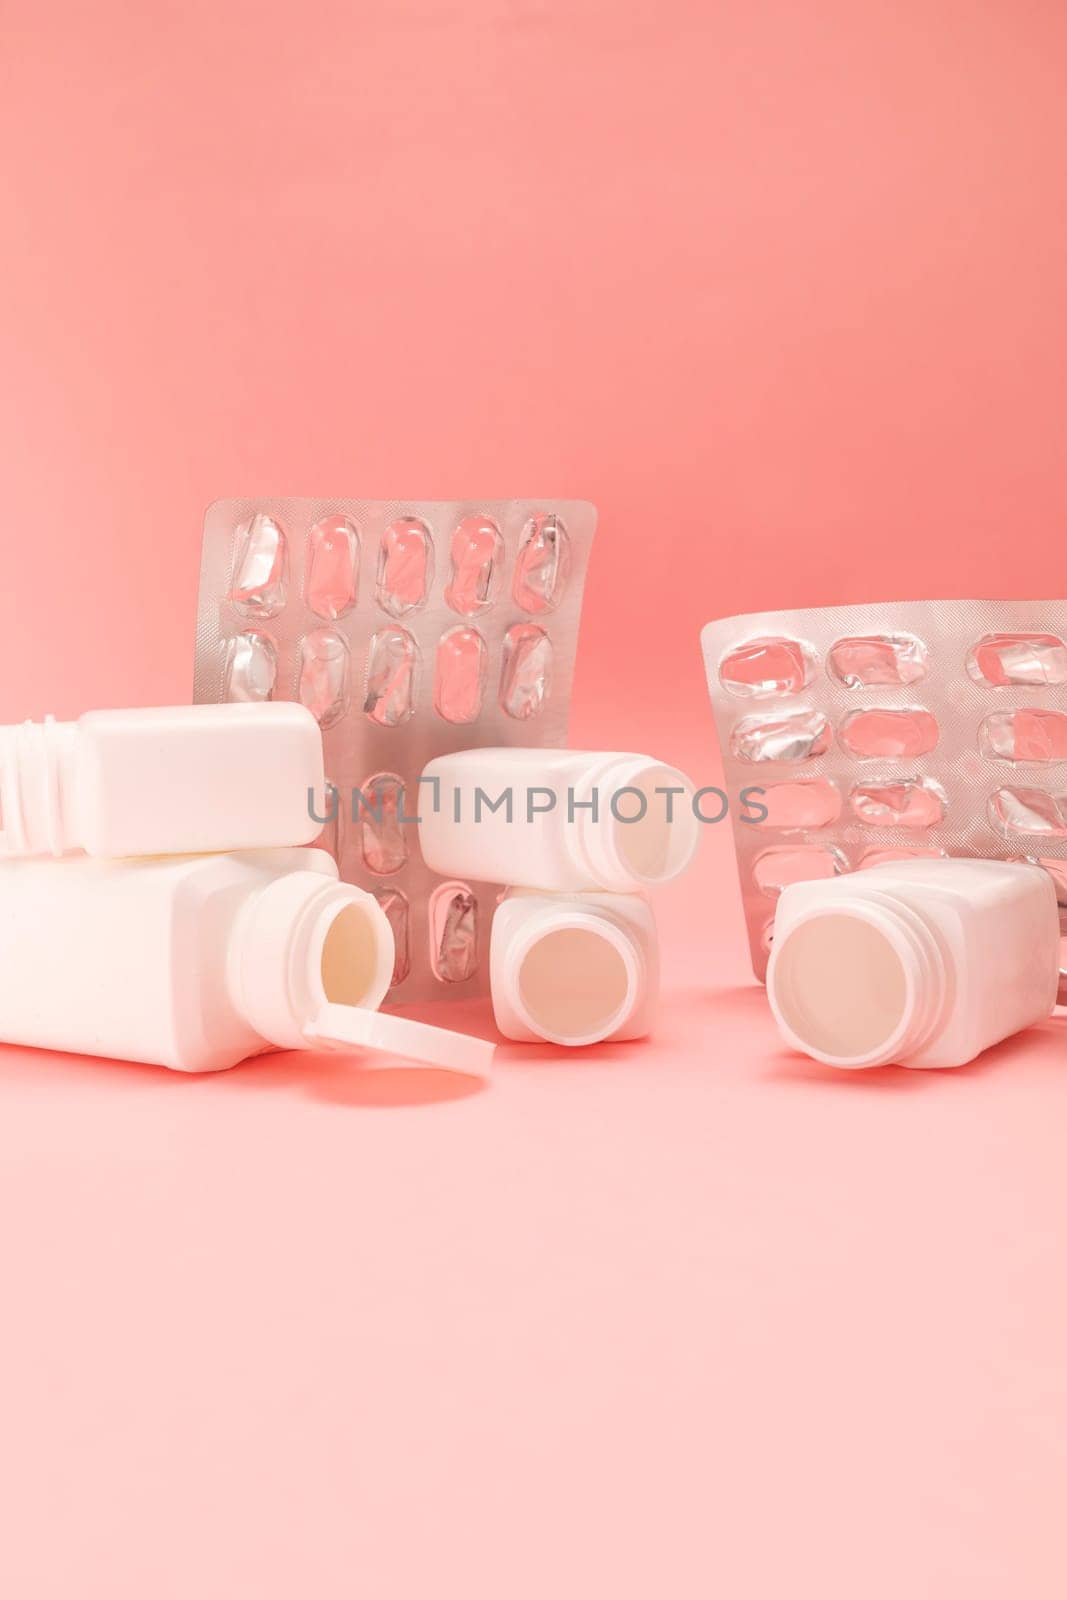 Empty plate with pills, capsule, vitamin bottles, containers on pink background. Medical, pharmaceutical business. Price, consumption concept. Medical expenses. Vertical, copy space for text